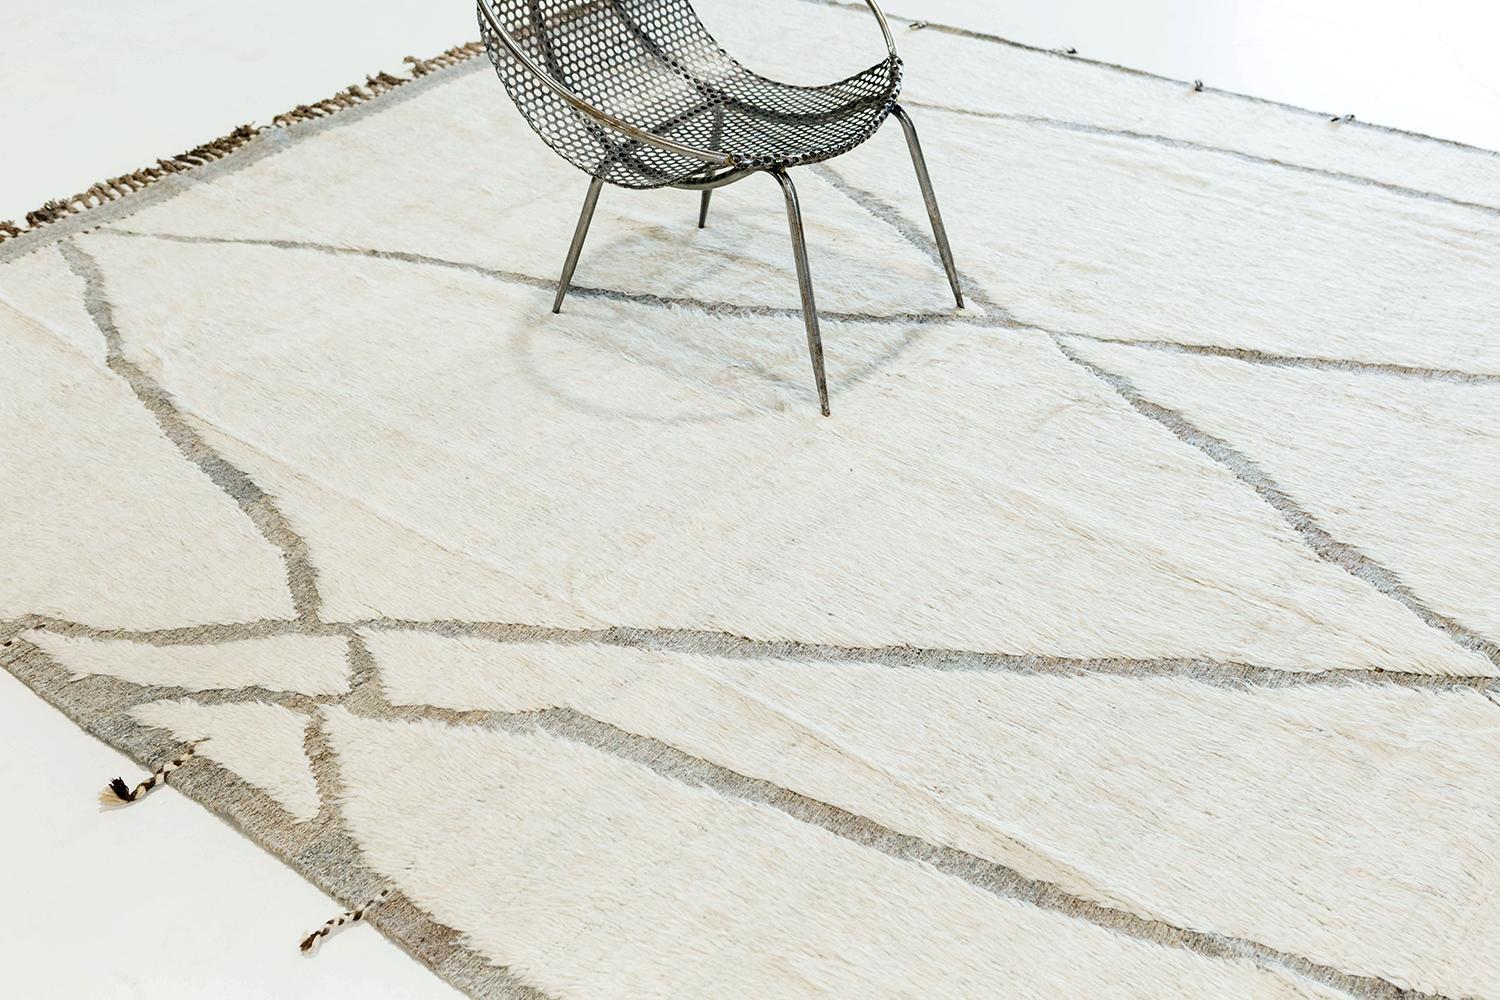 Azilal tribal rugs from Morocco are noted for their handspun wool, saturated color, intuitive motifs and charmingly irregular surface. Mehraban's Atlas Collection includes Azilal originals and contemporary interpretations. This handwoven rug is a